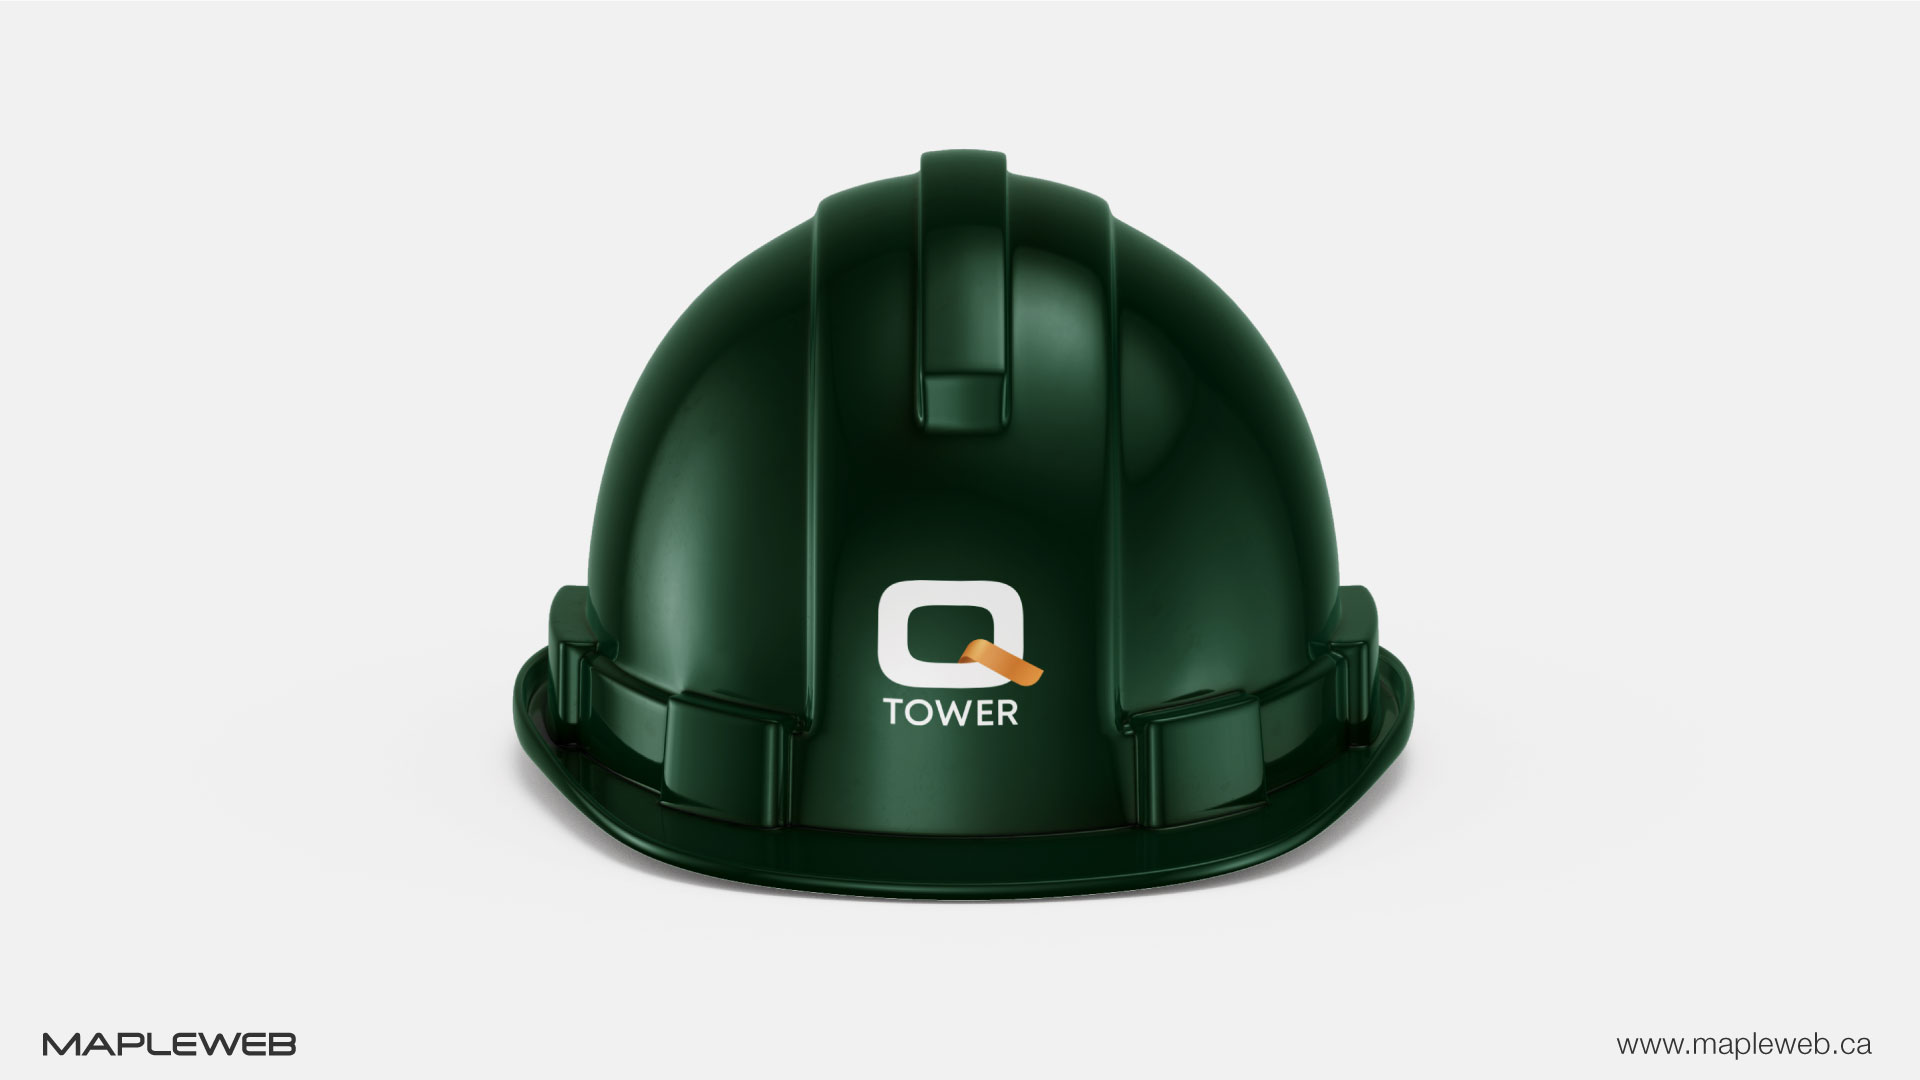 q-tower-brand-logo-design-by-mapleweb-vancouver-canada-cap-mock